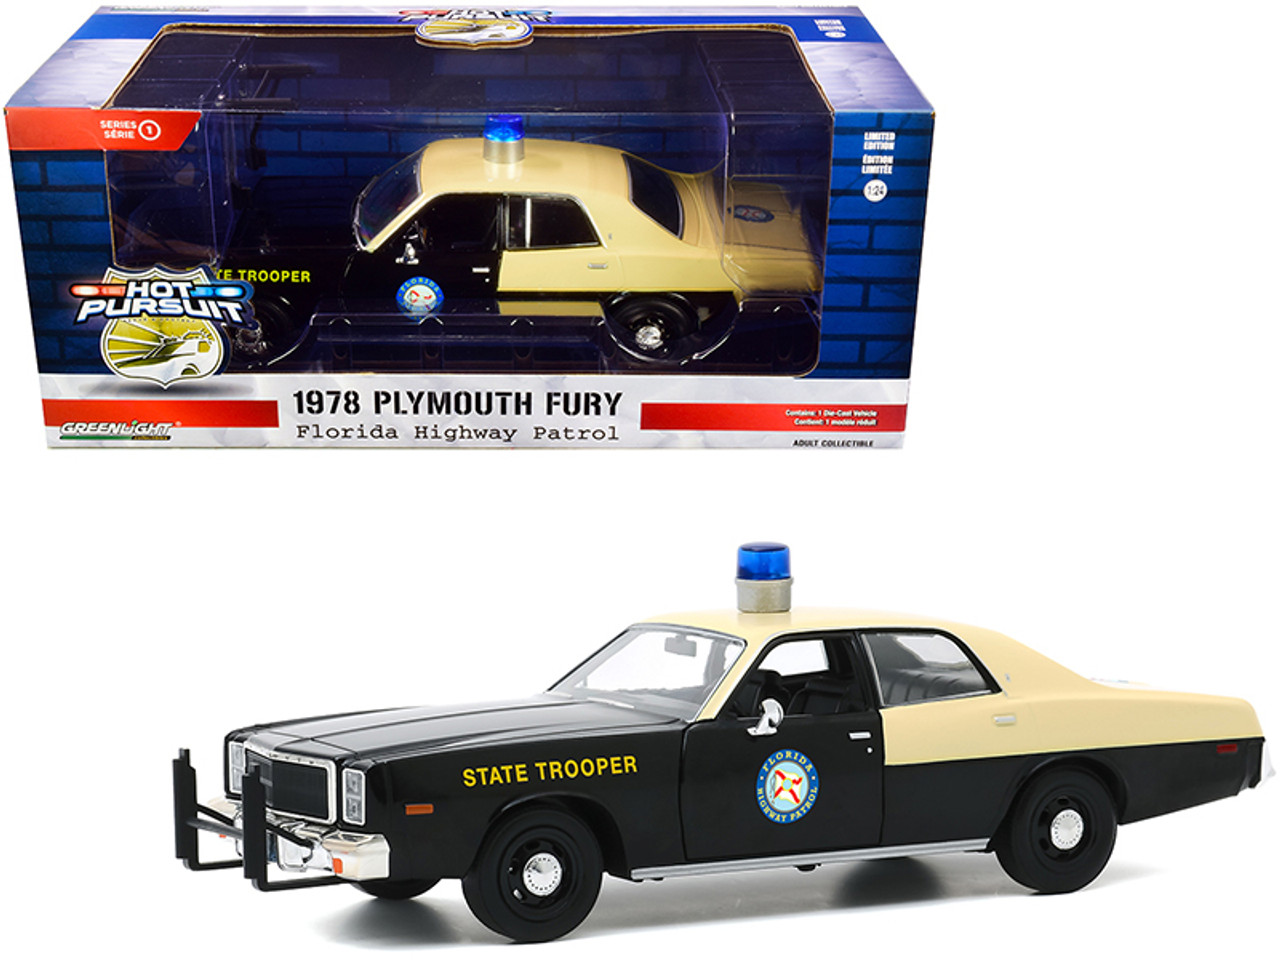 1978 Plymouth Fury "Florida Highway Patrol" Black and Yellow "Hot Pursuit" 1/24 Diecast Model Car by Greenlight